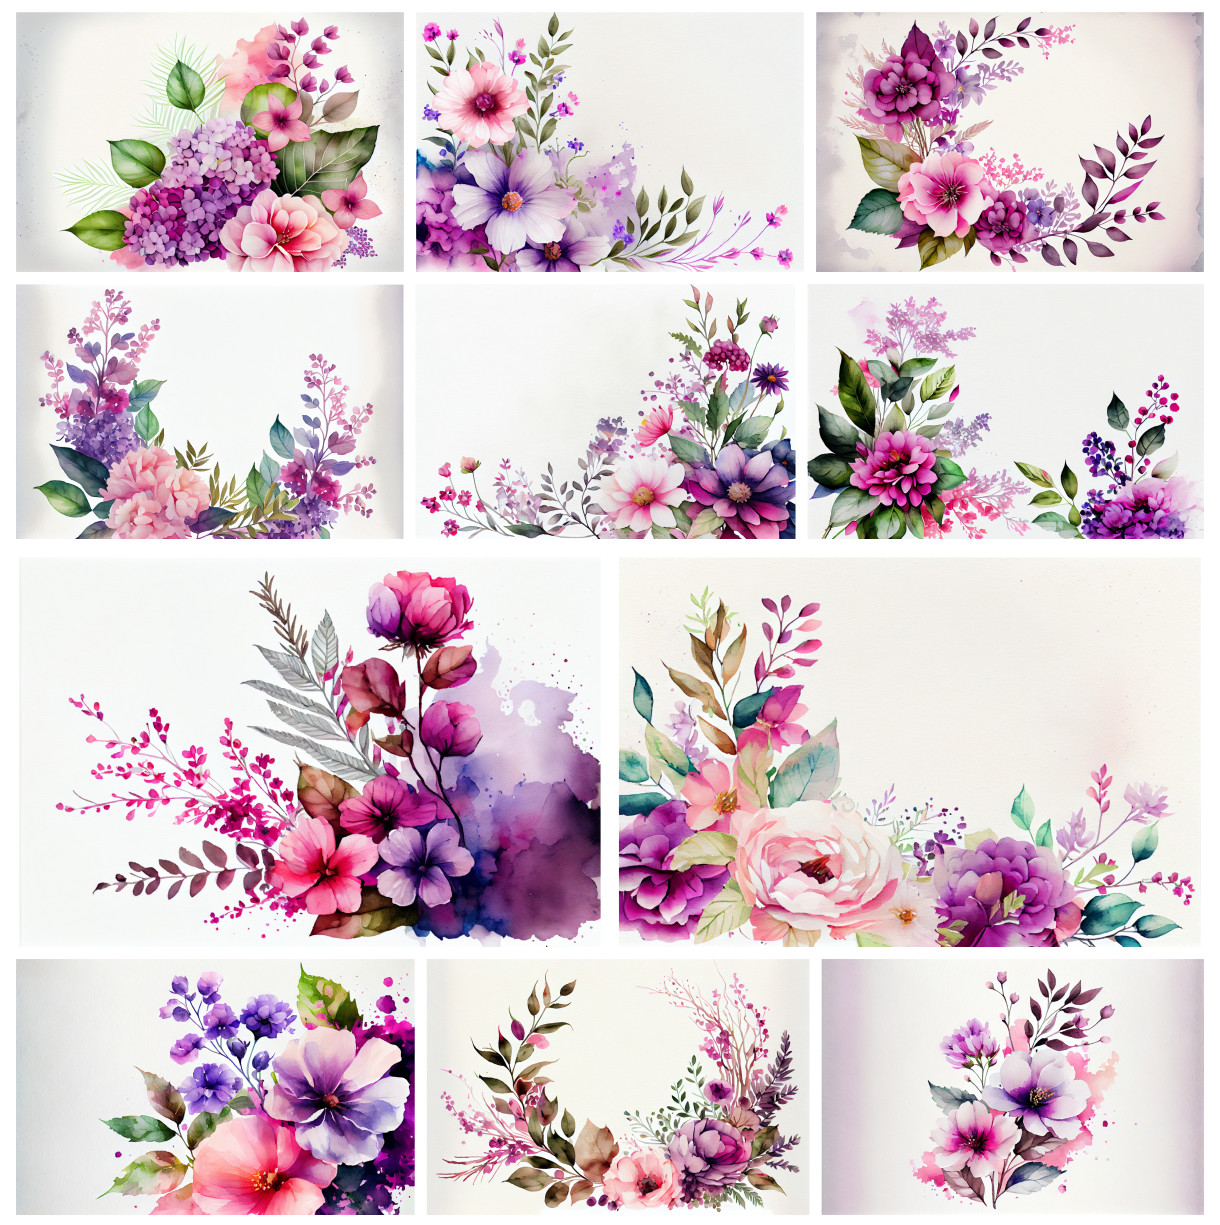 Captivating Watercolor Violet and Pink Flower Backgrounds: A Symphony of Elegance